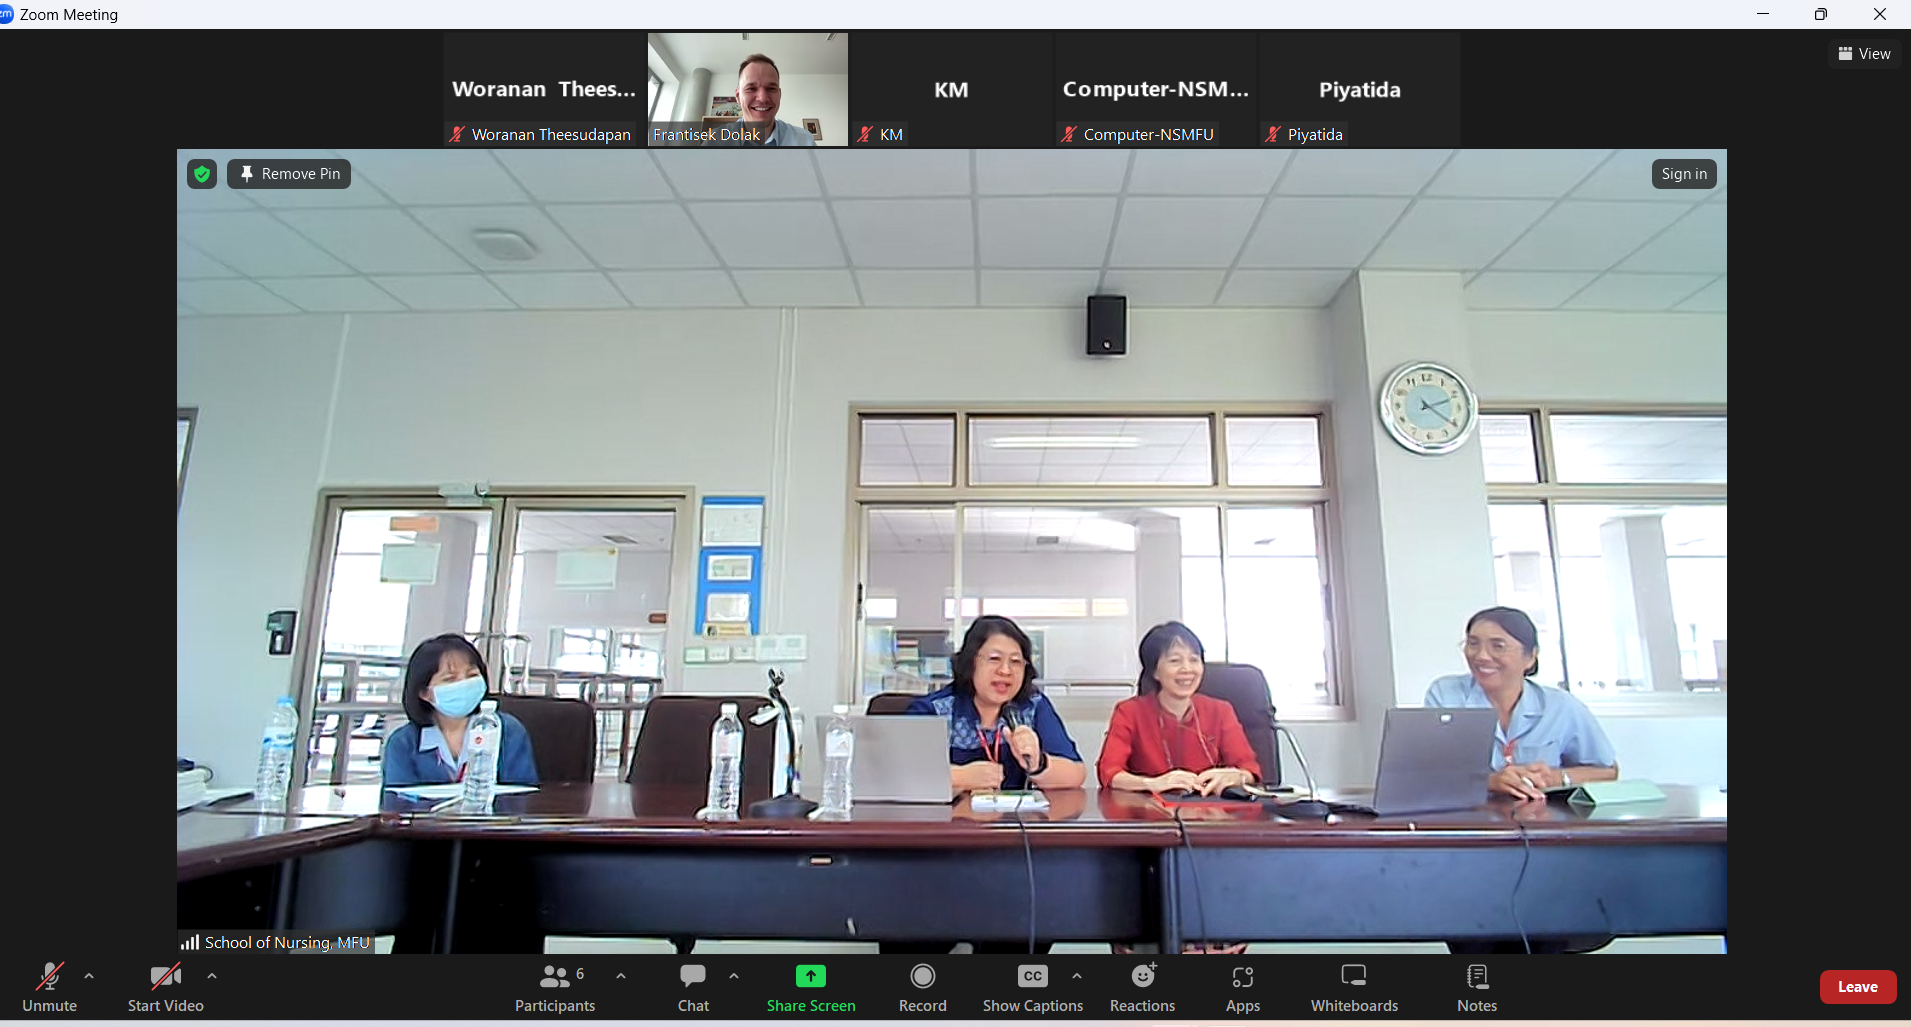 The MFU School of Nursing held an online meeting with the University of South Bohemia, Czech Republic to discuss objectives and plan activities for the academic visit. 